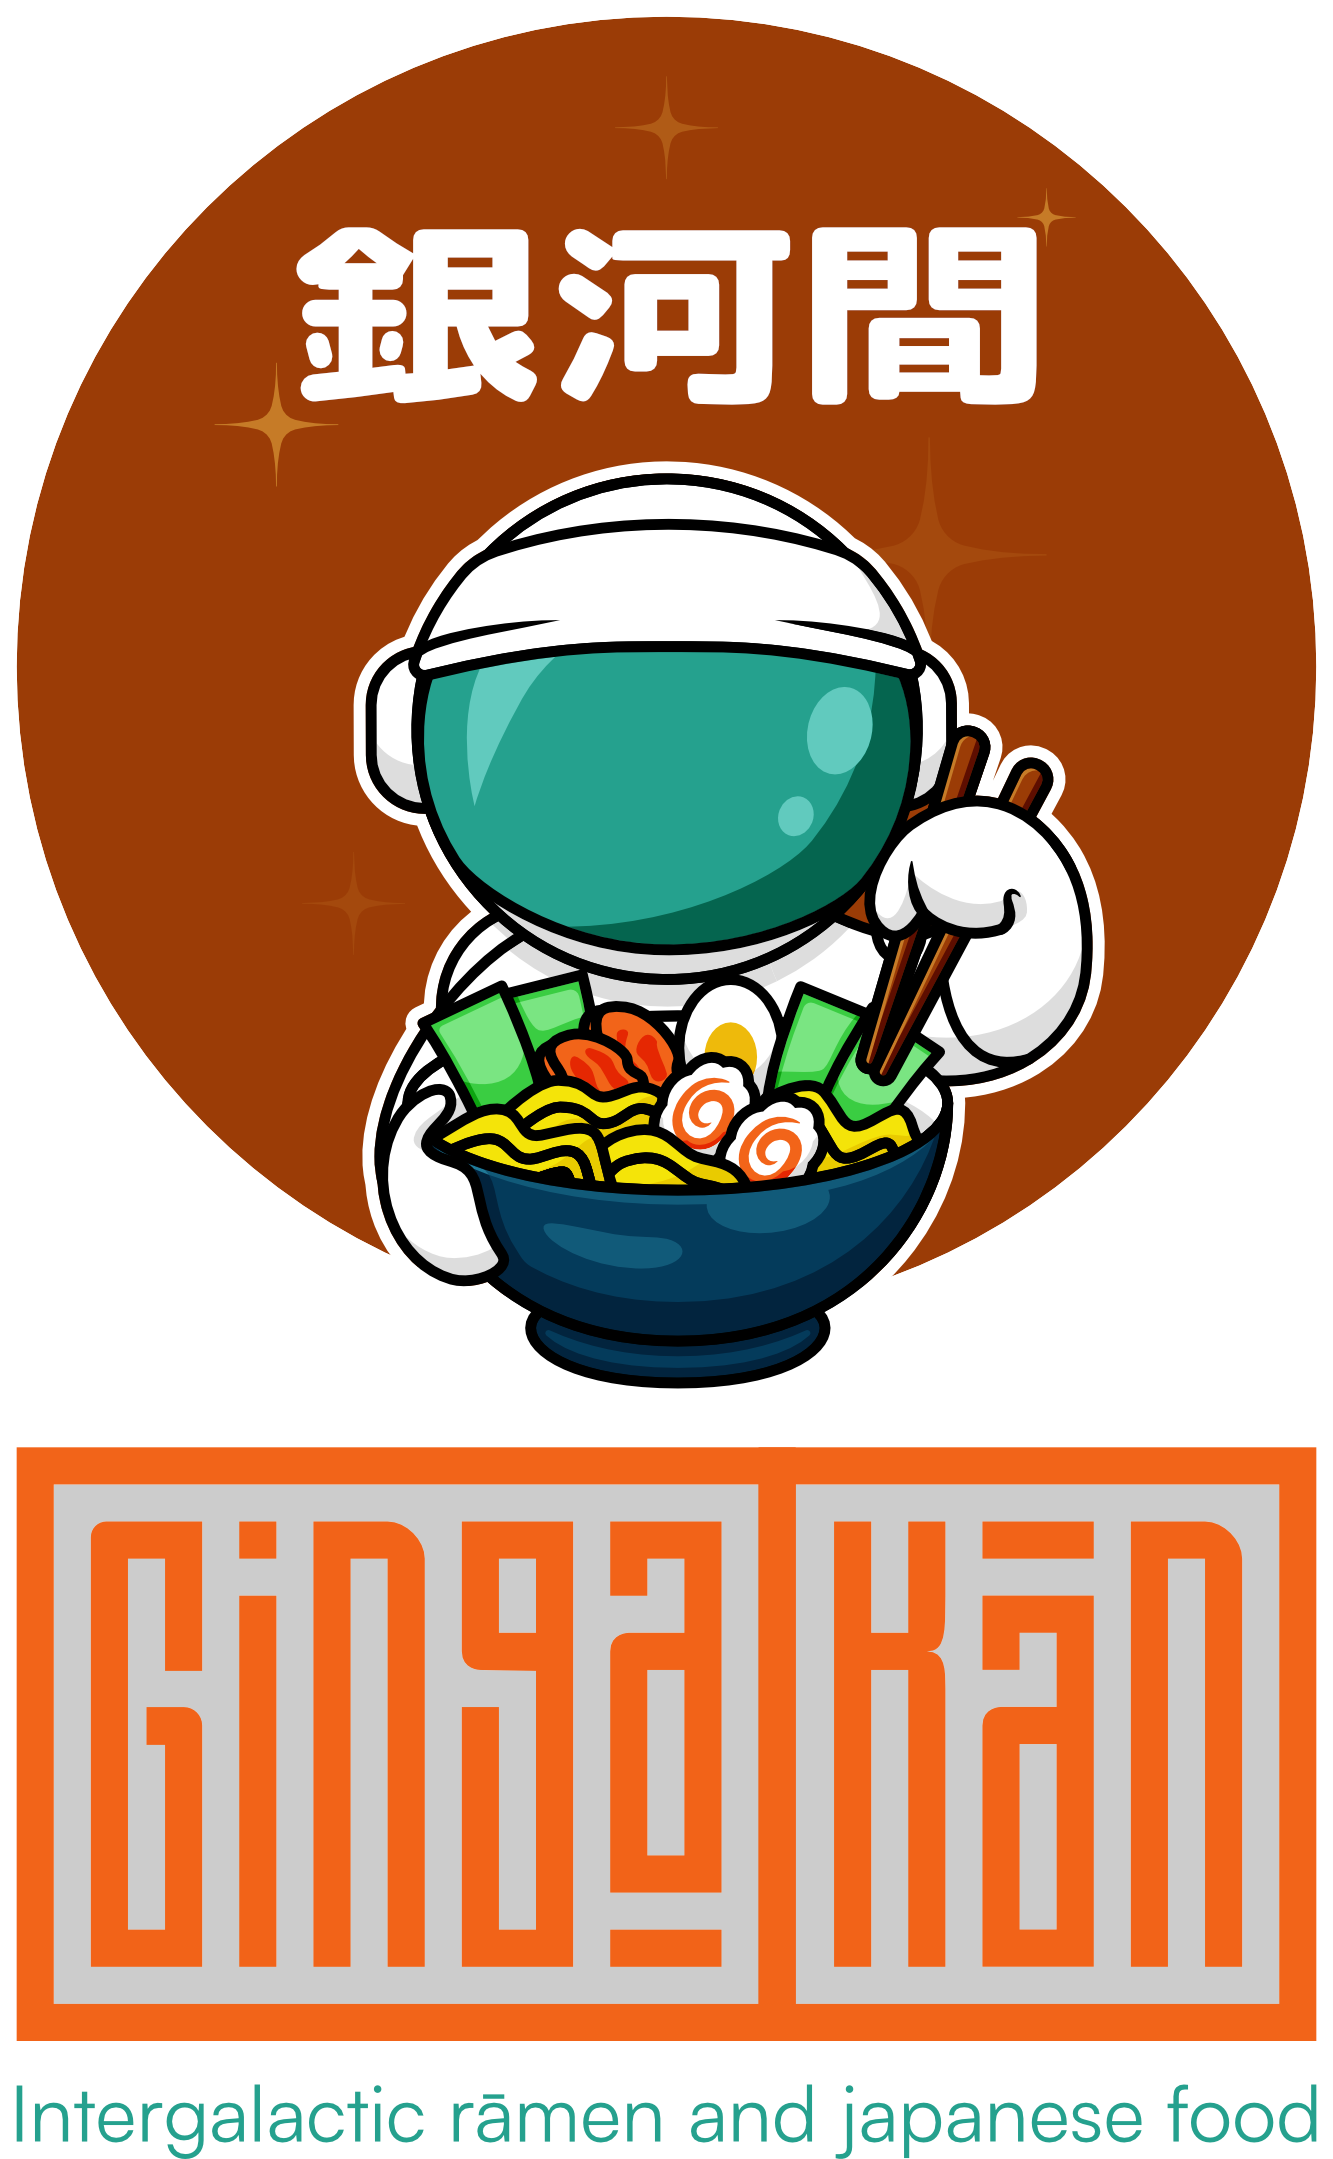 Logo of GingaKan, with a cute astronaut eating a bowl of ramen, with the tagline 'Intergalactic ramen and japanese food'